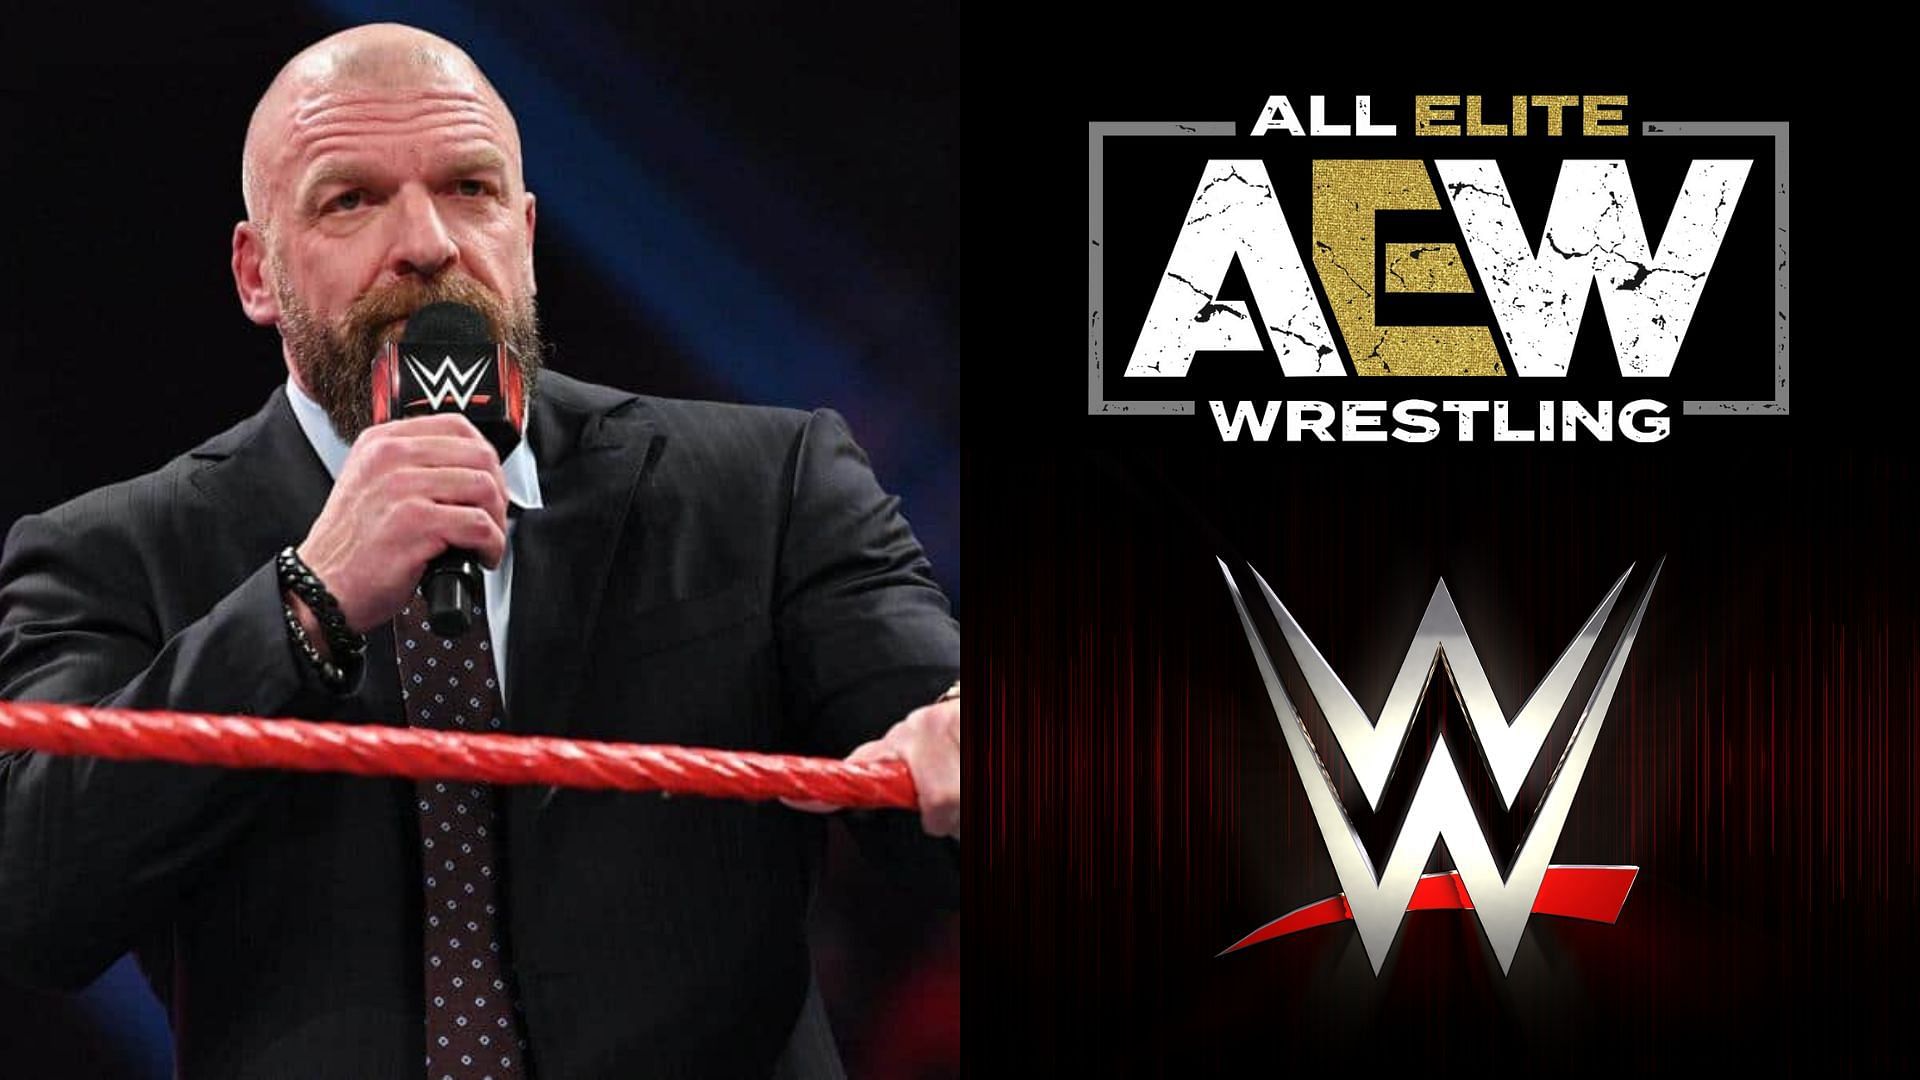 Triple H (left), AEW and WWE logos (right)